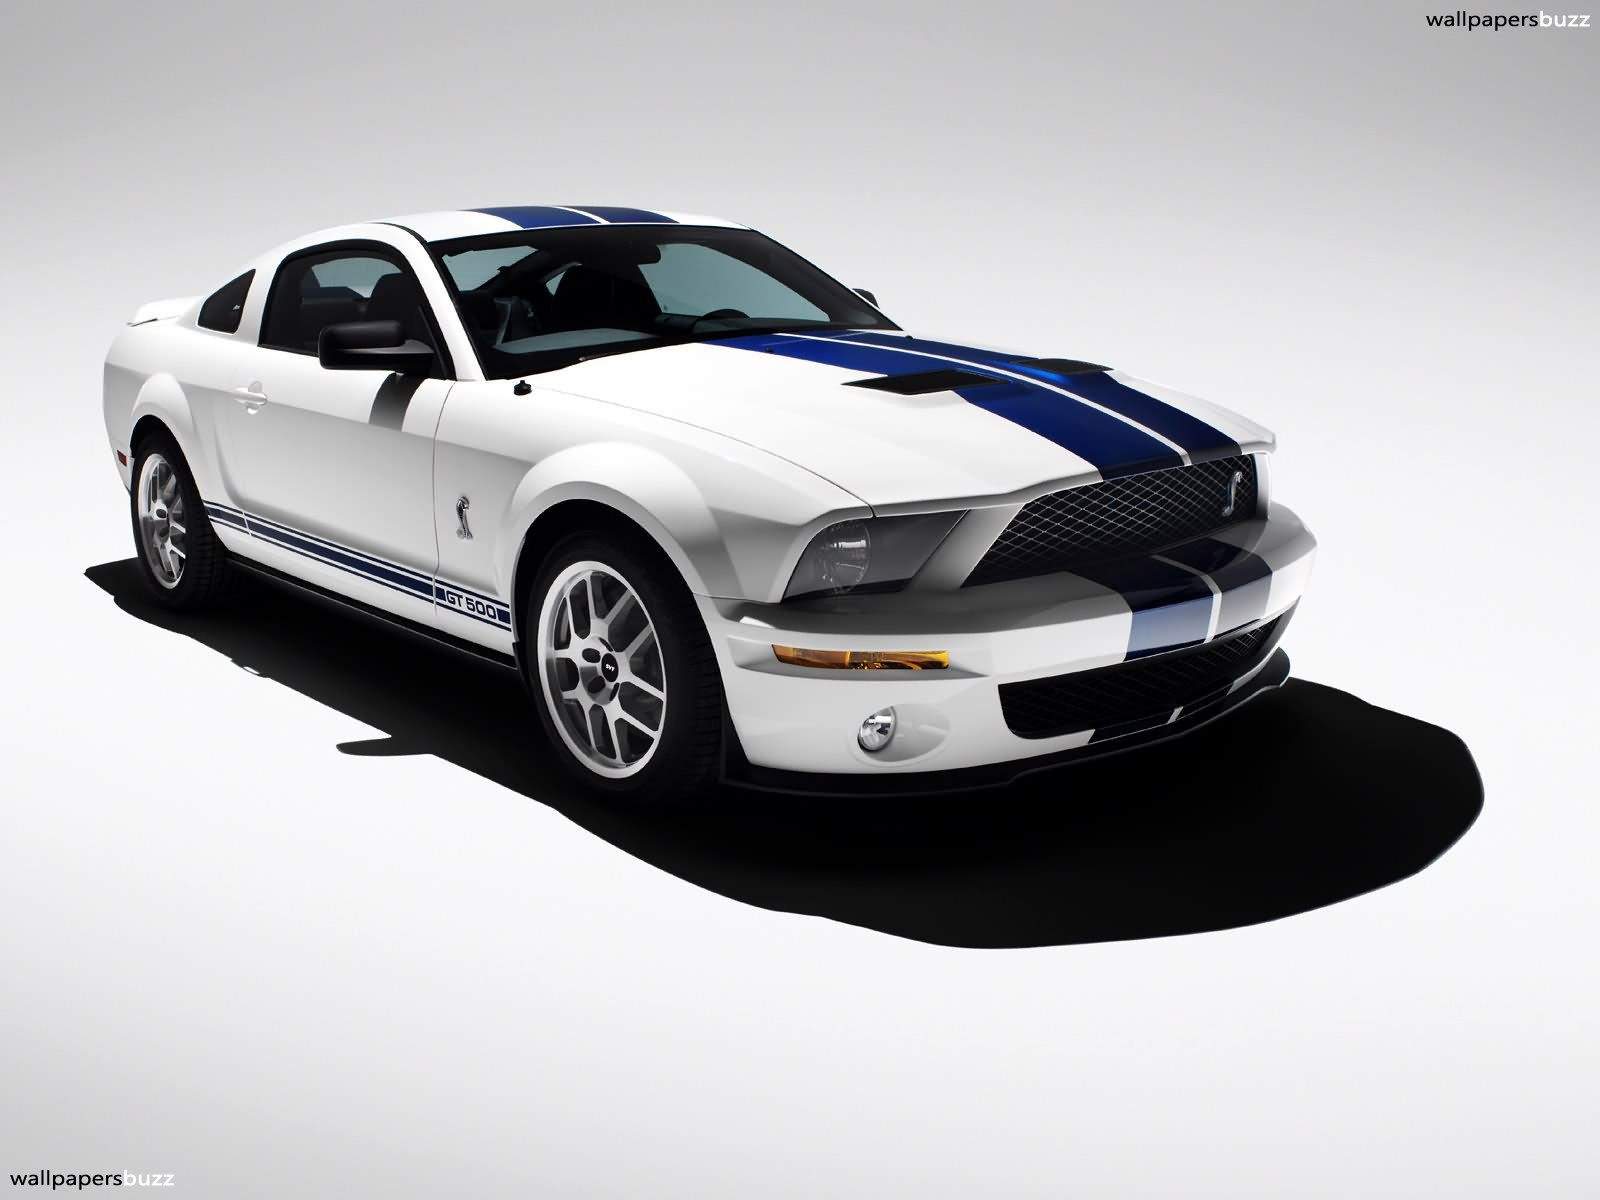 Ford Mustang Wallpaper HD In Cars Imageci